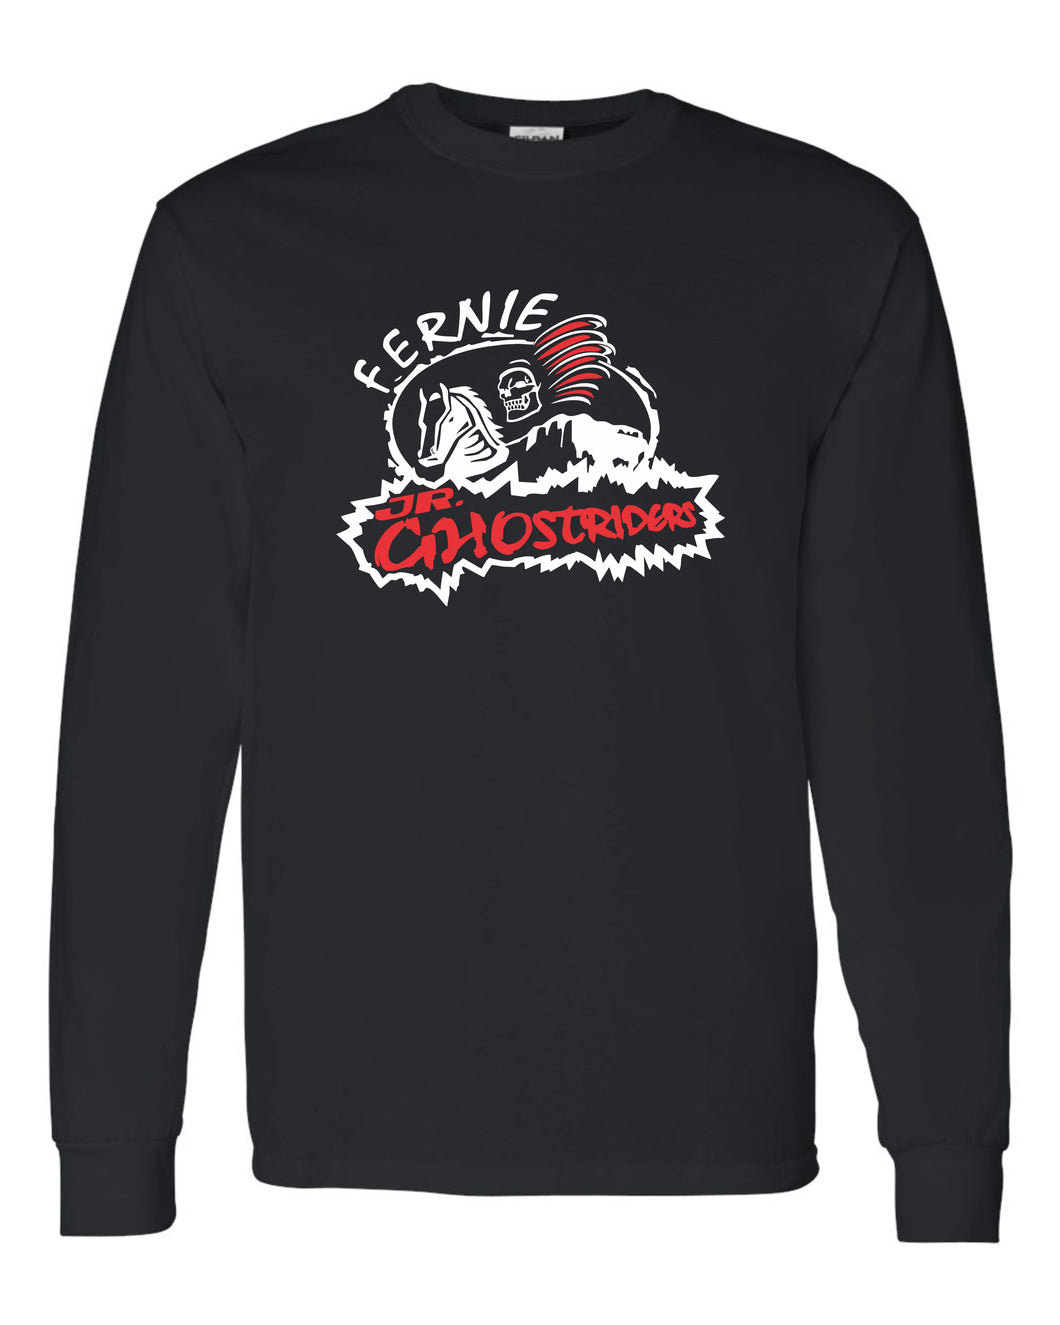 LONG SLEEVE T-SHIRT - GHOSTRIDERS LOGO - YOUTH